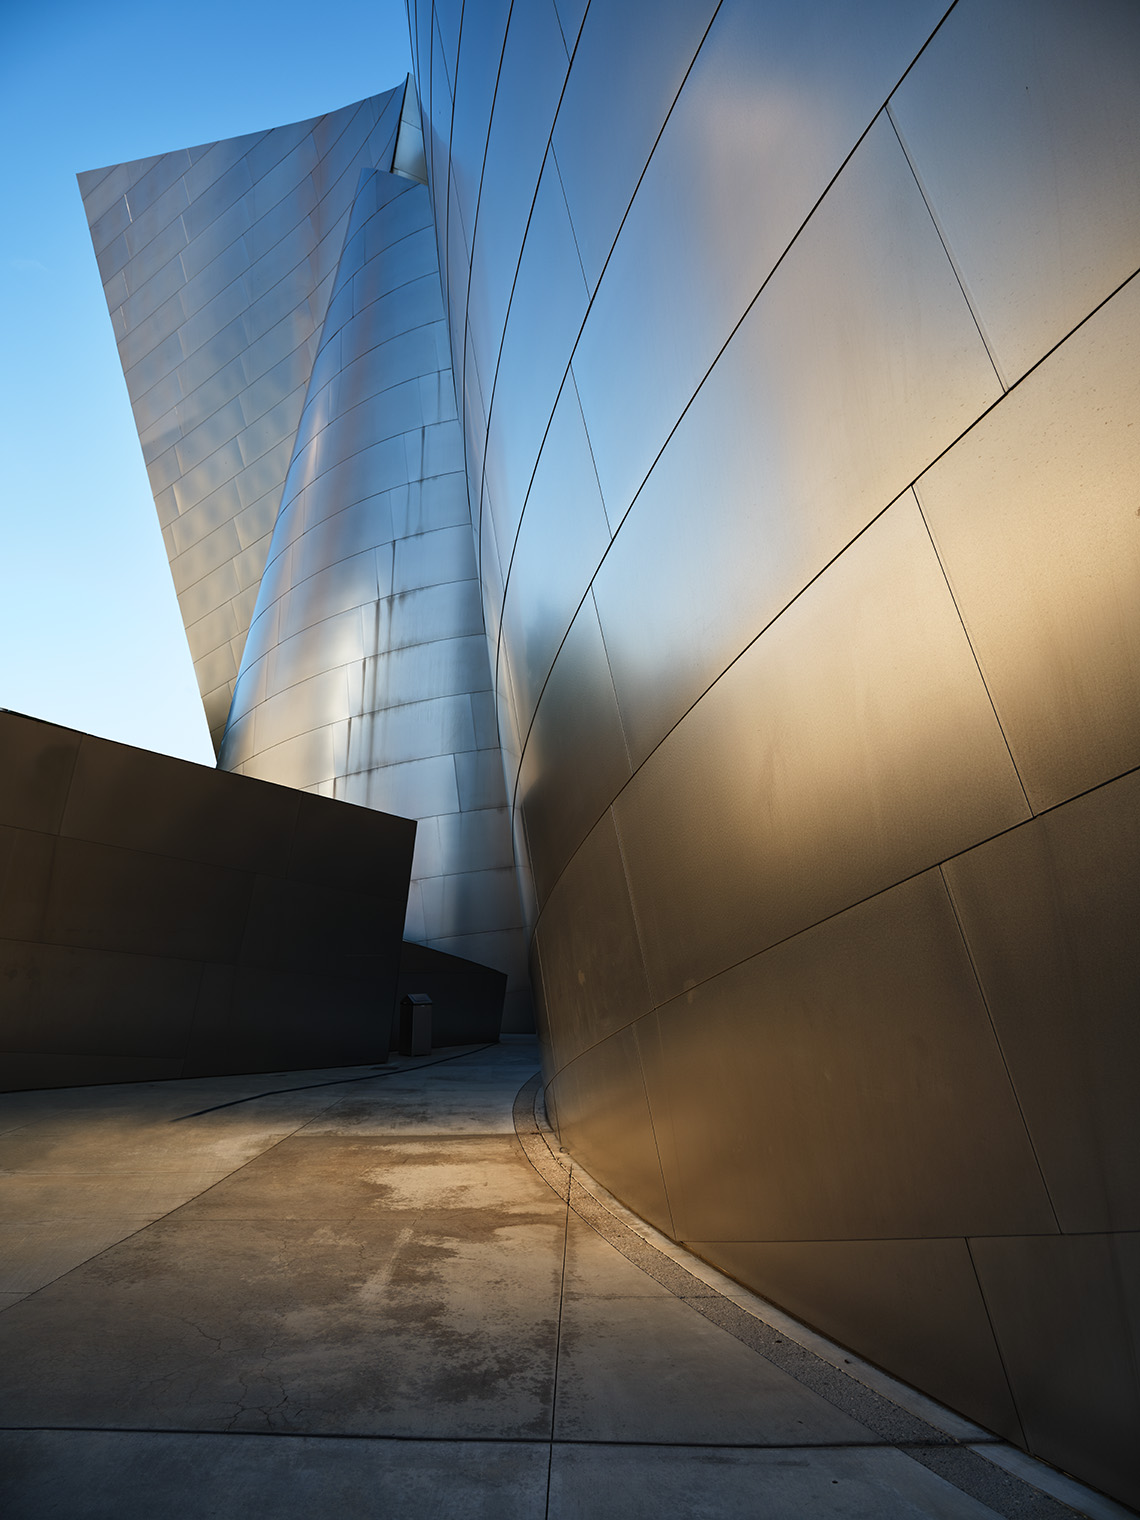 dw_2209_gehry__DSF1154_comp_1140pxl